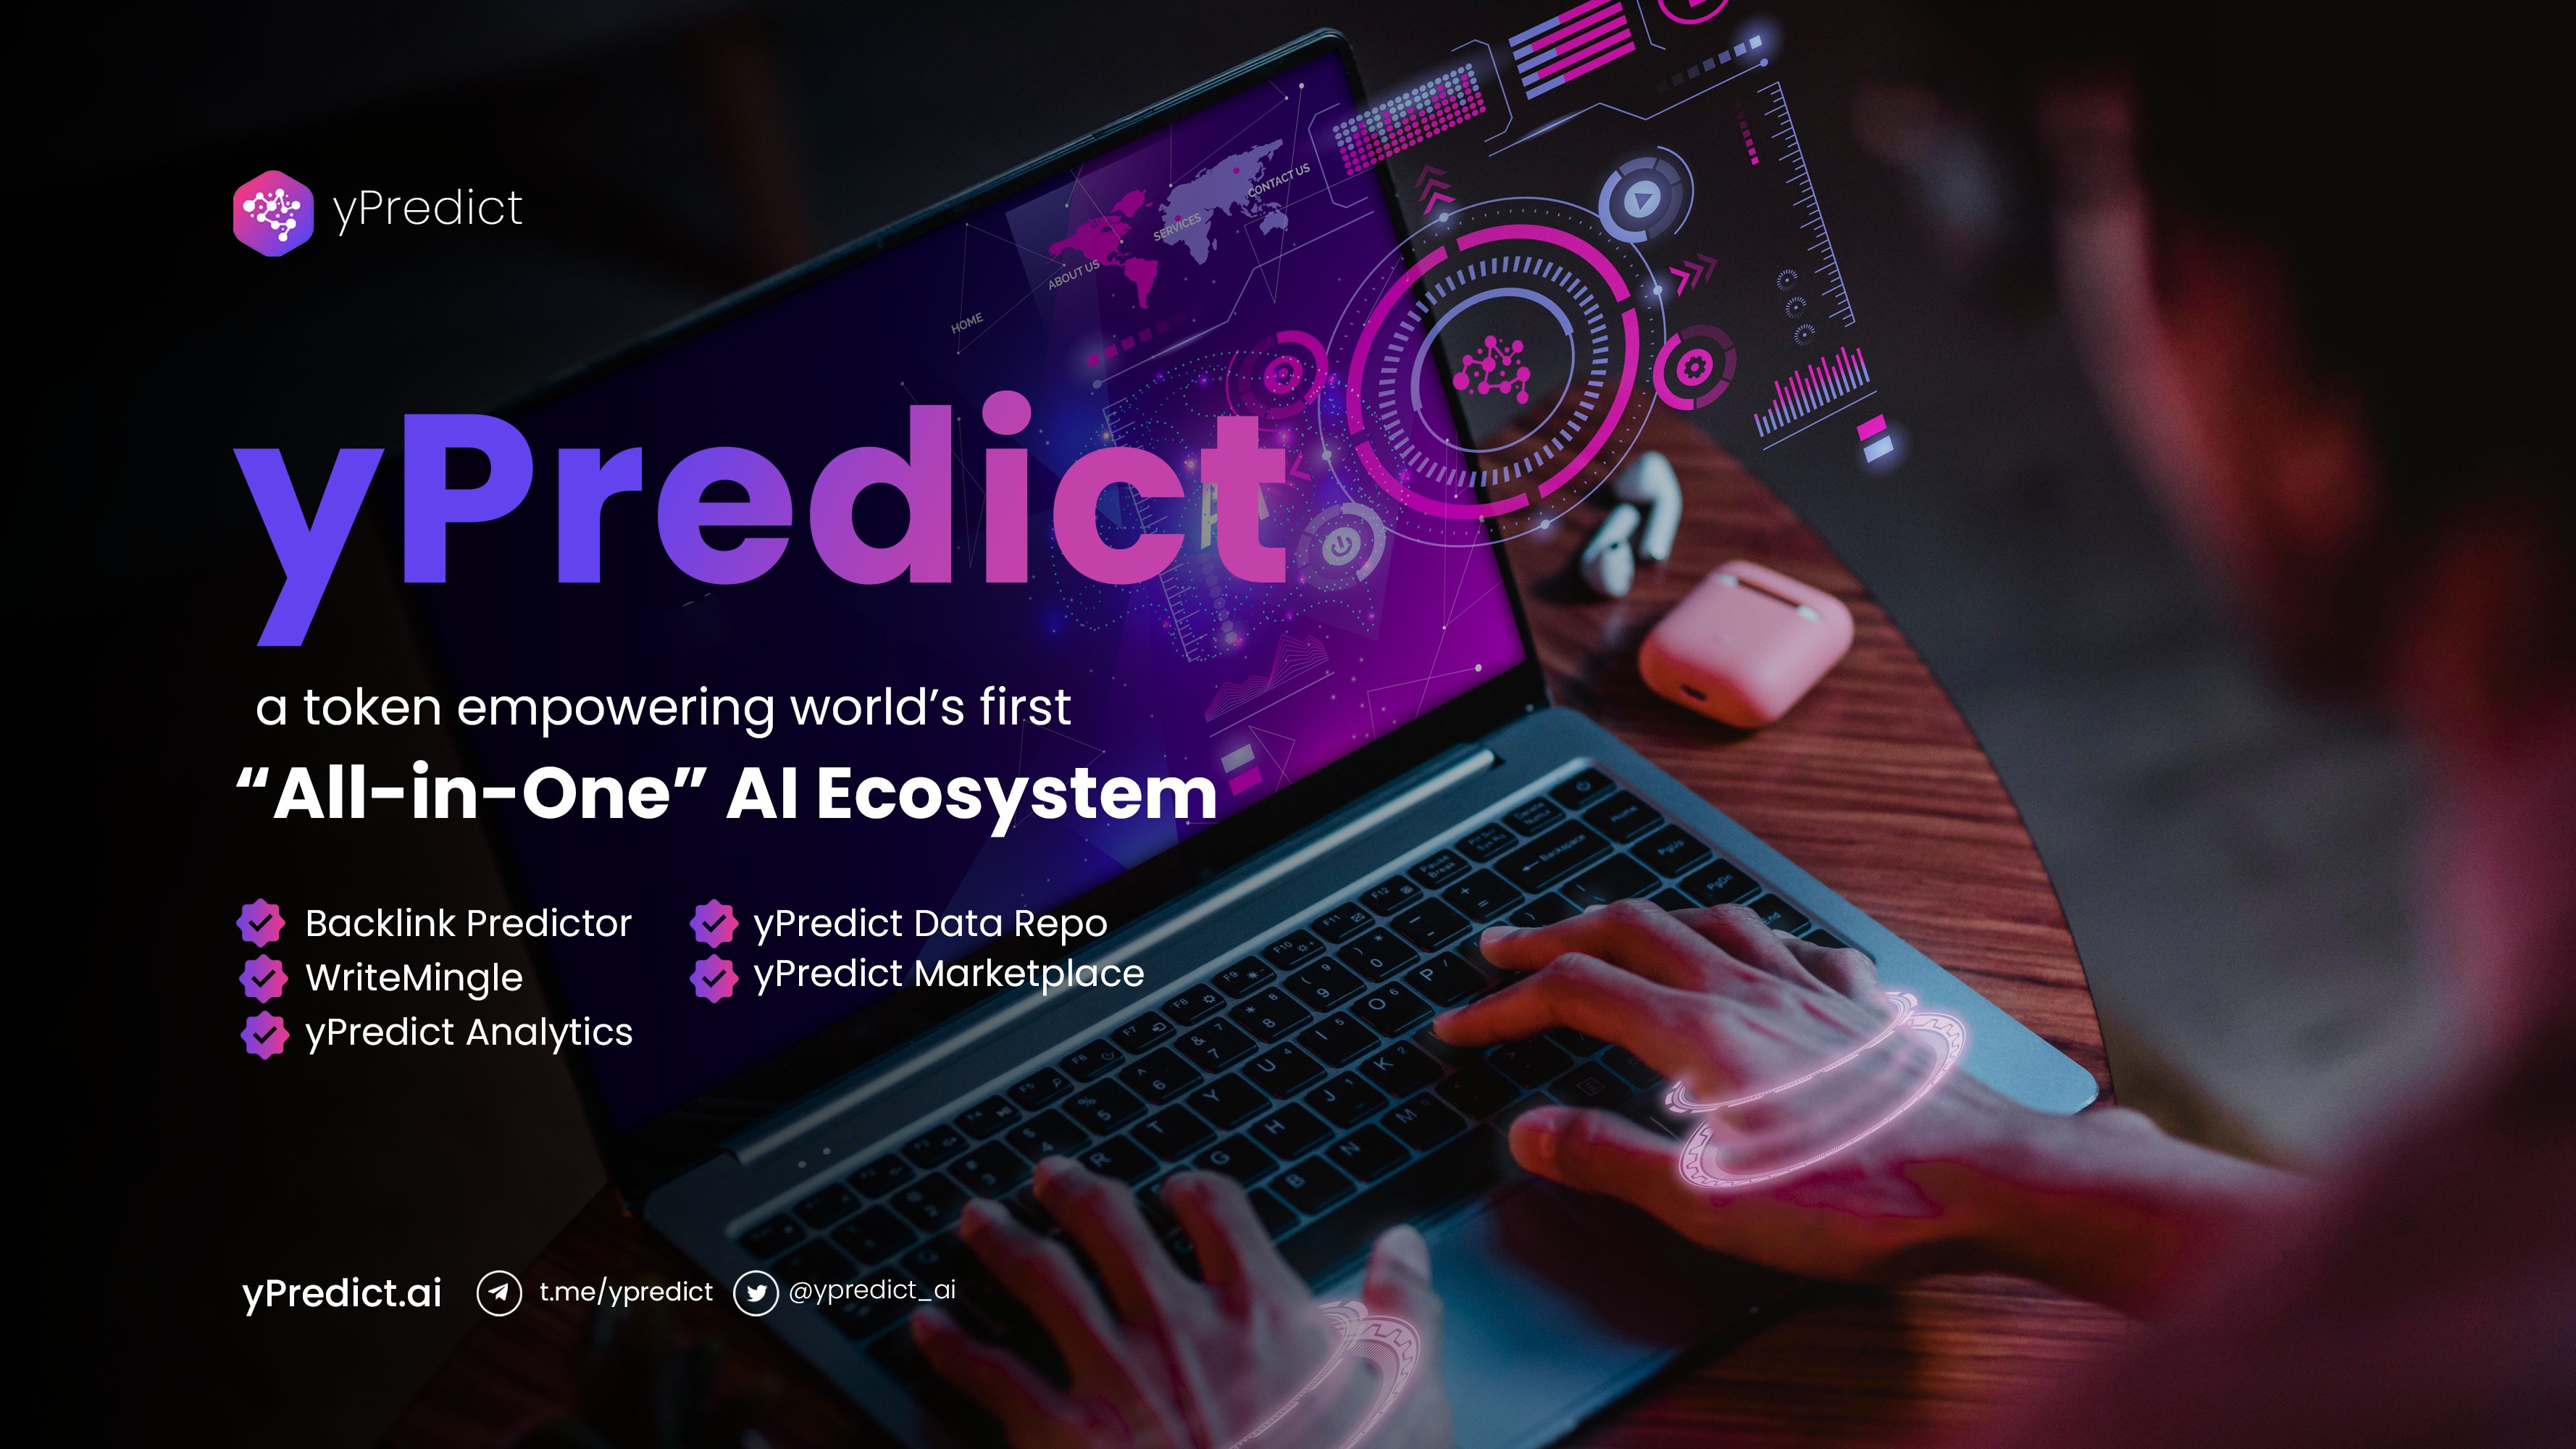 yPredict combines traditional statistical models and AI to offer a comprehensive set of trading tools in its ongoing crypto presale.